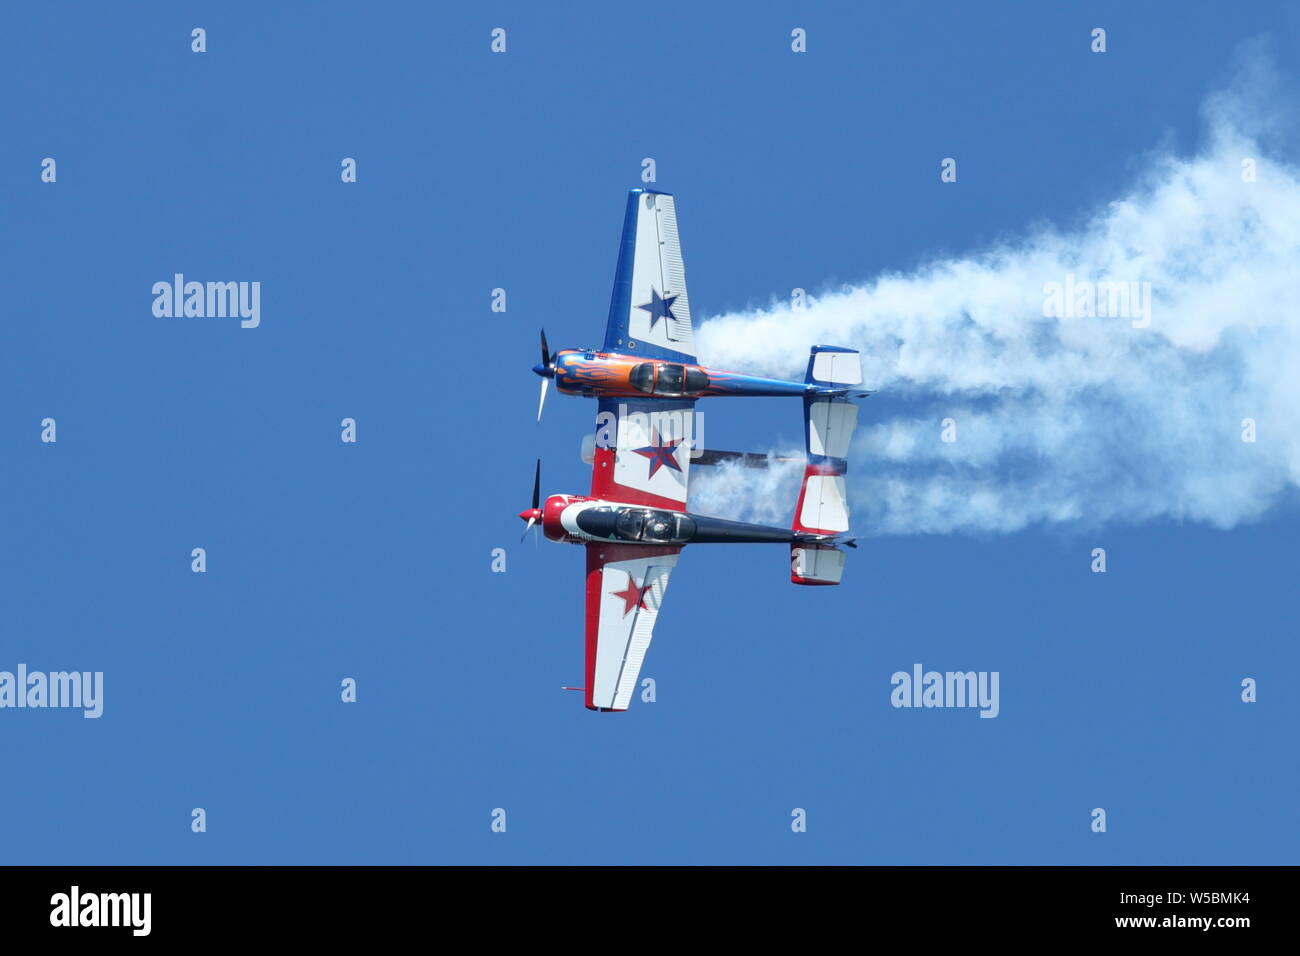 Yak 110 aircraft flying in the Great Pacific Airshow in Huntington Beach, California on October 19, 2018 Stock Photo